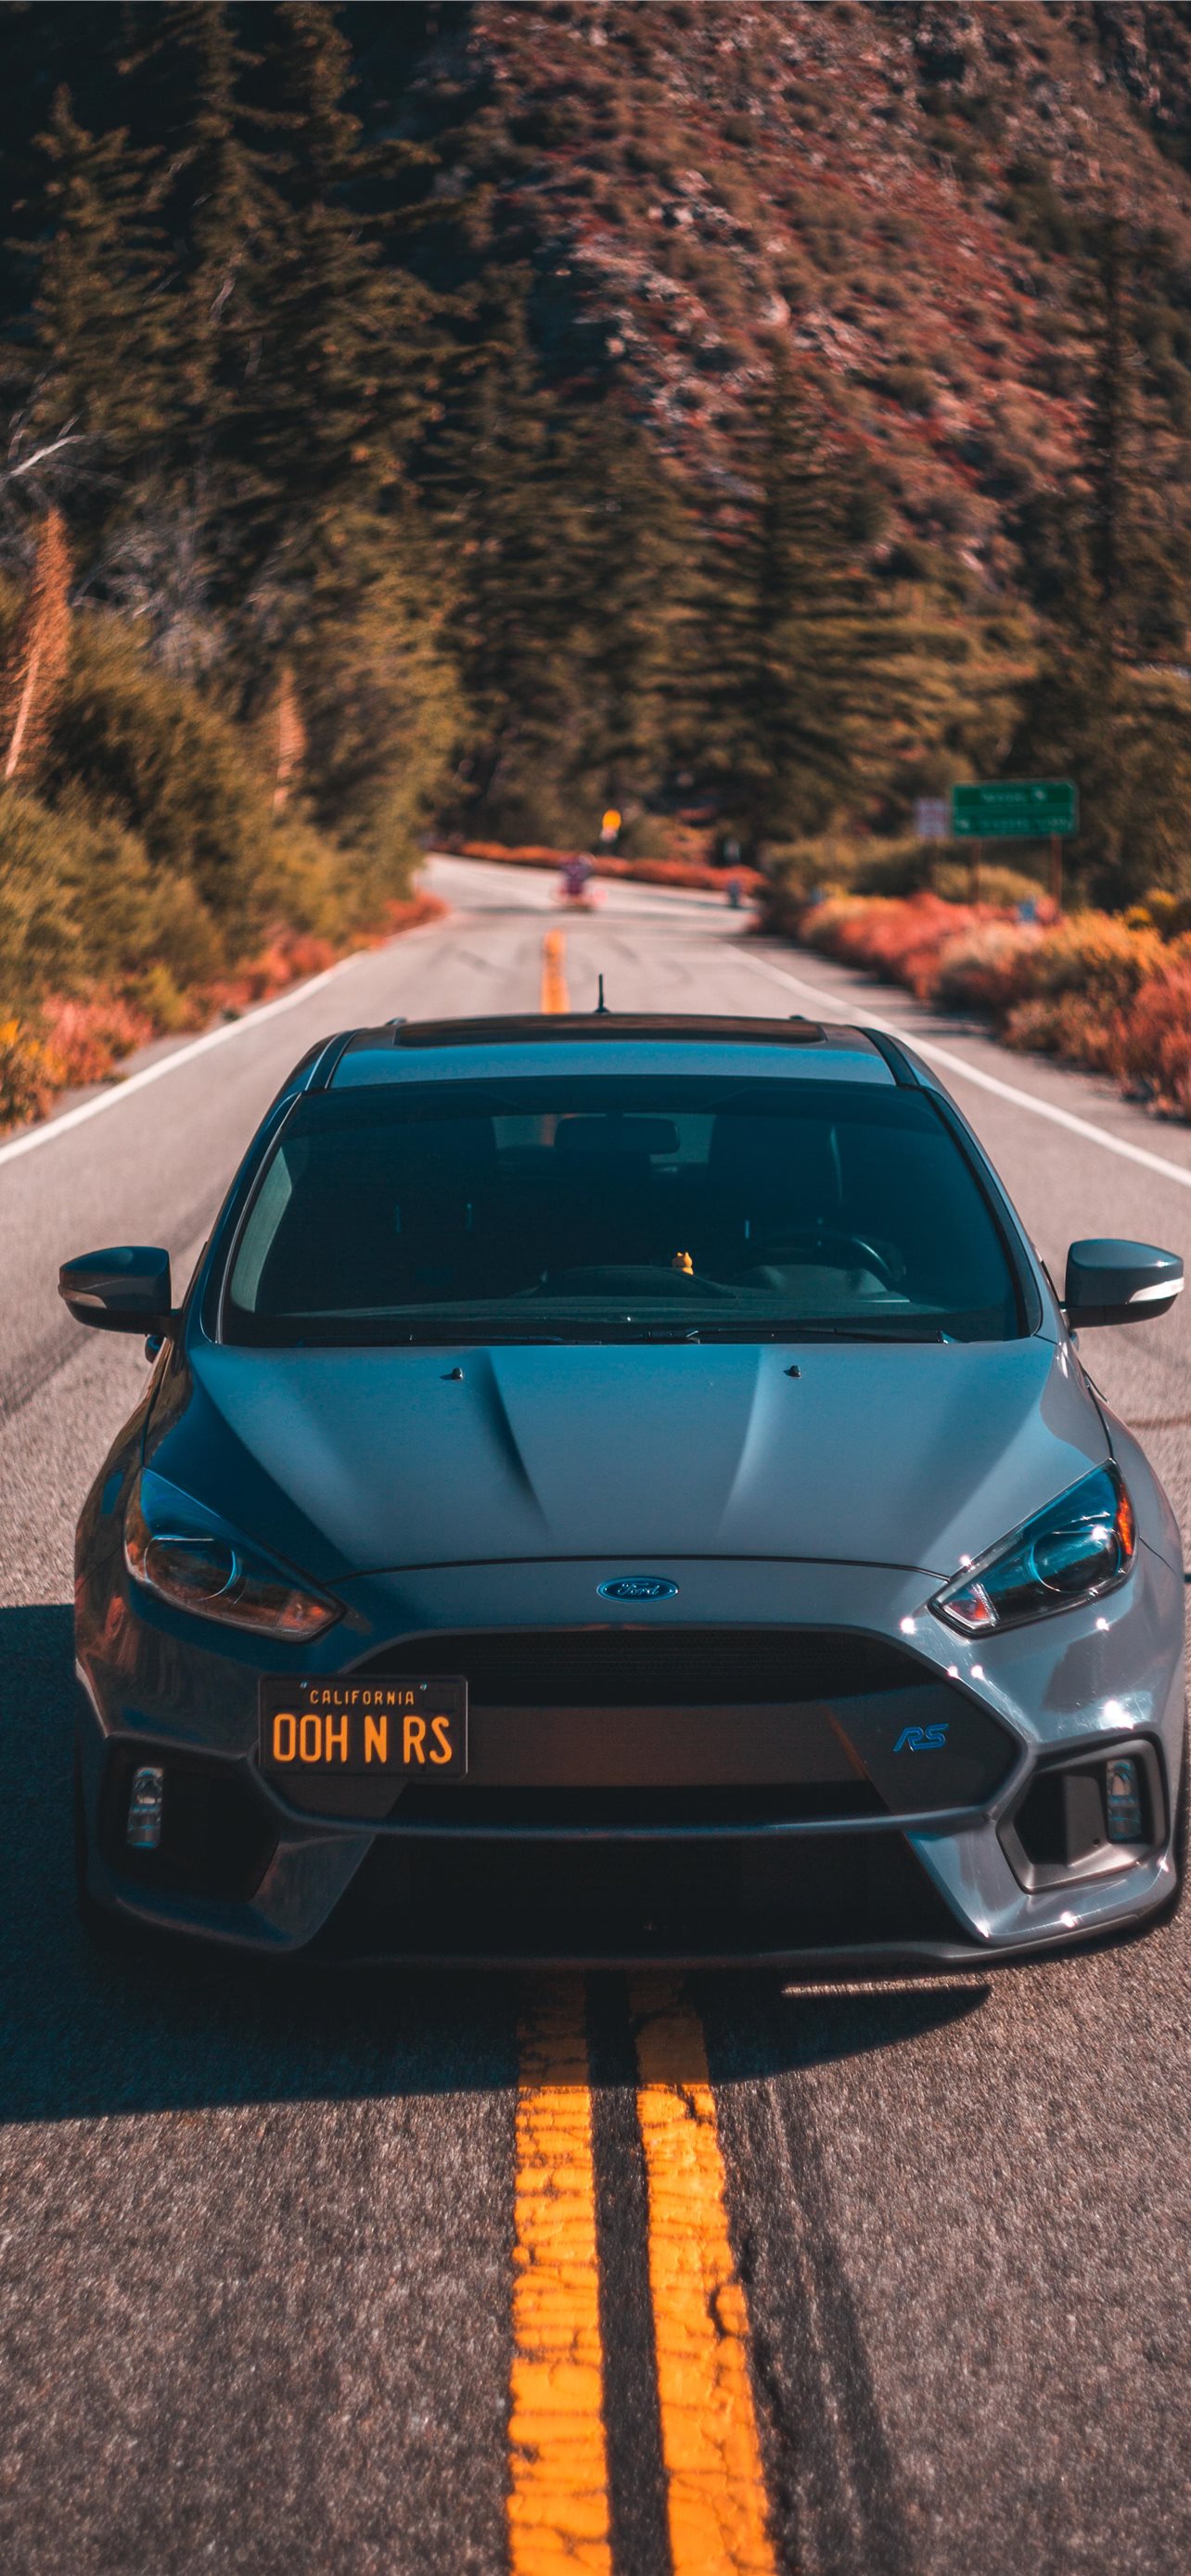 Best Ford focus st 2019 iPhone HD Wallpapers - iLikeWallpaper